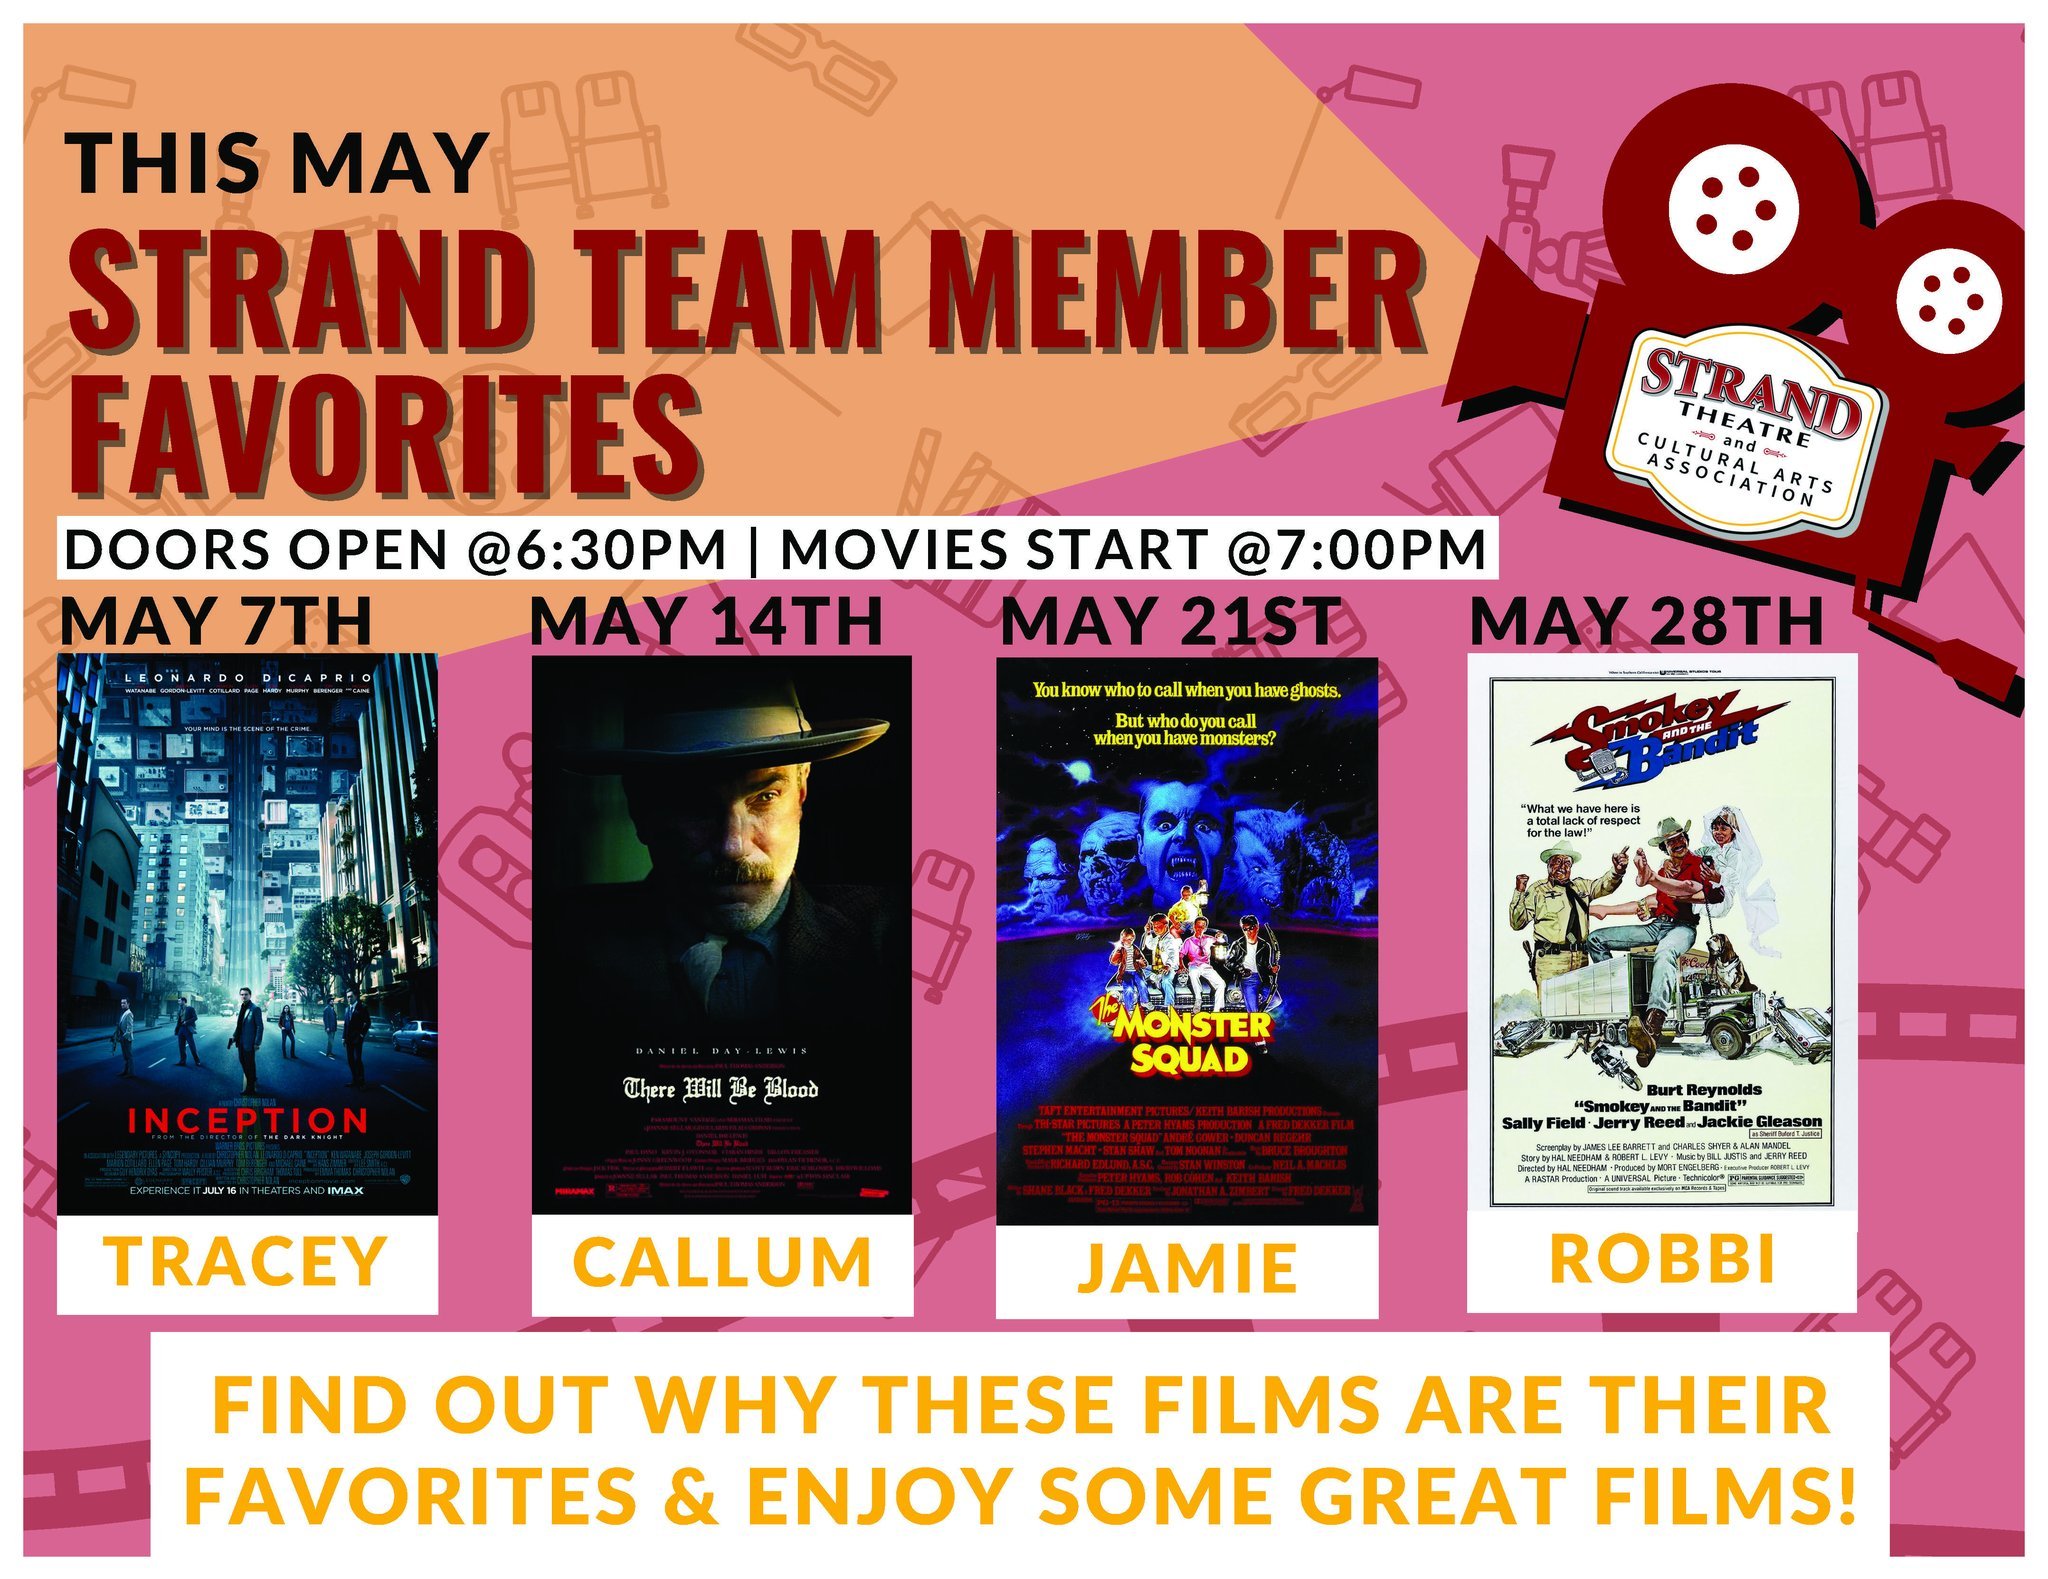 All this month enjoy our May Film Series:
&quot;Strand Team Member Favorites&quot;
Join Us For&hellip;
May 7th - &quot;Inception&quot; (2010) - Won Four Oscars. A mind-bending wonder.
May 14th - &quot;There Will Be Blood&quot; (2007) - Won Two Oscars